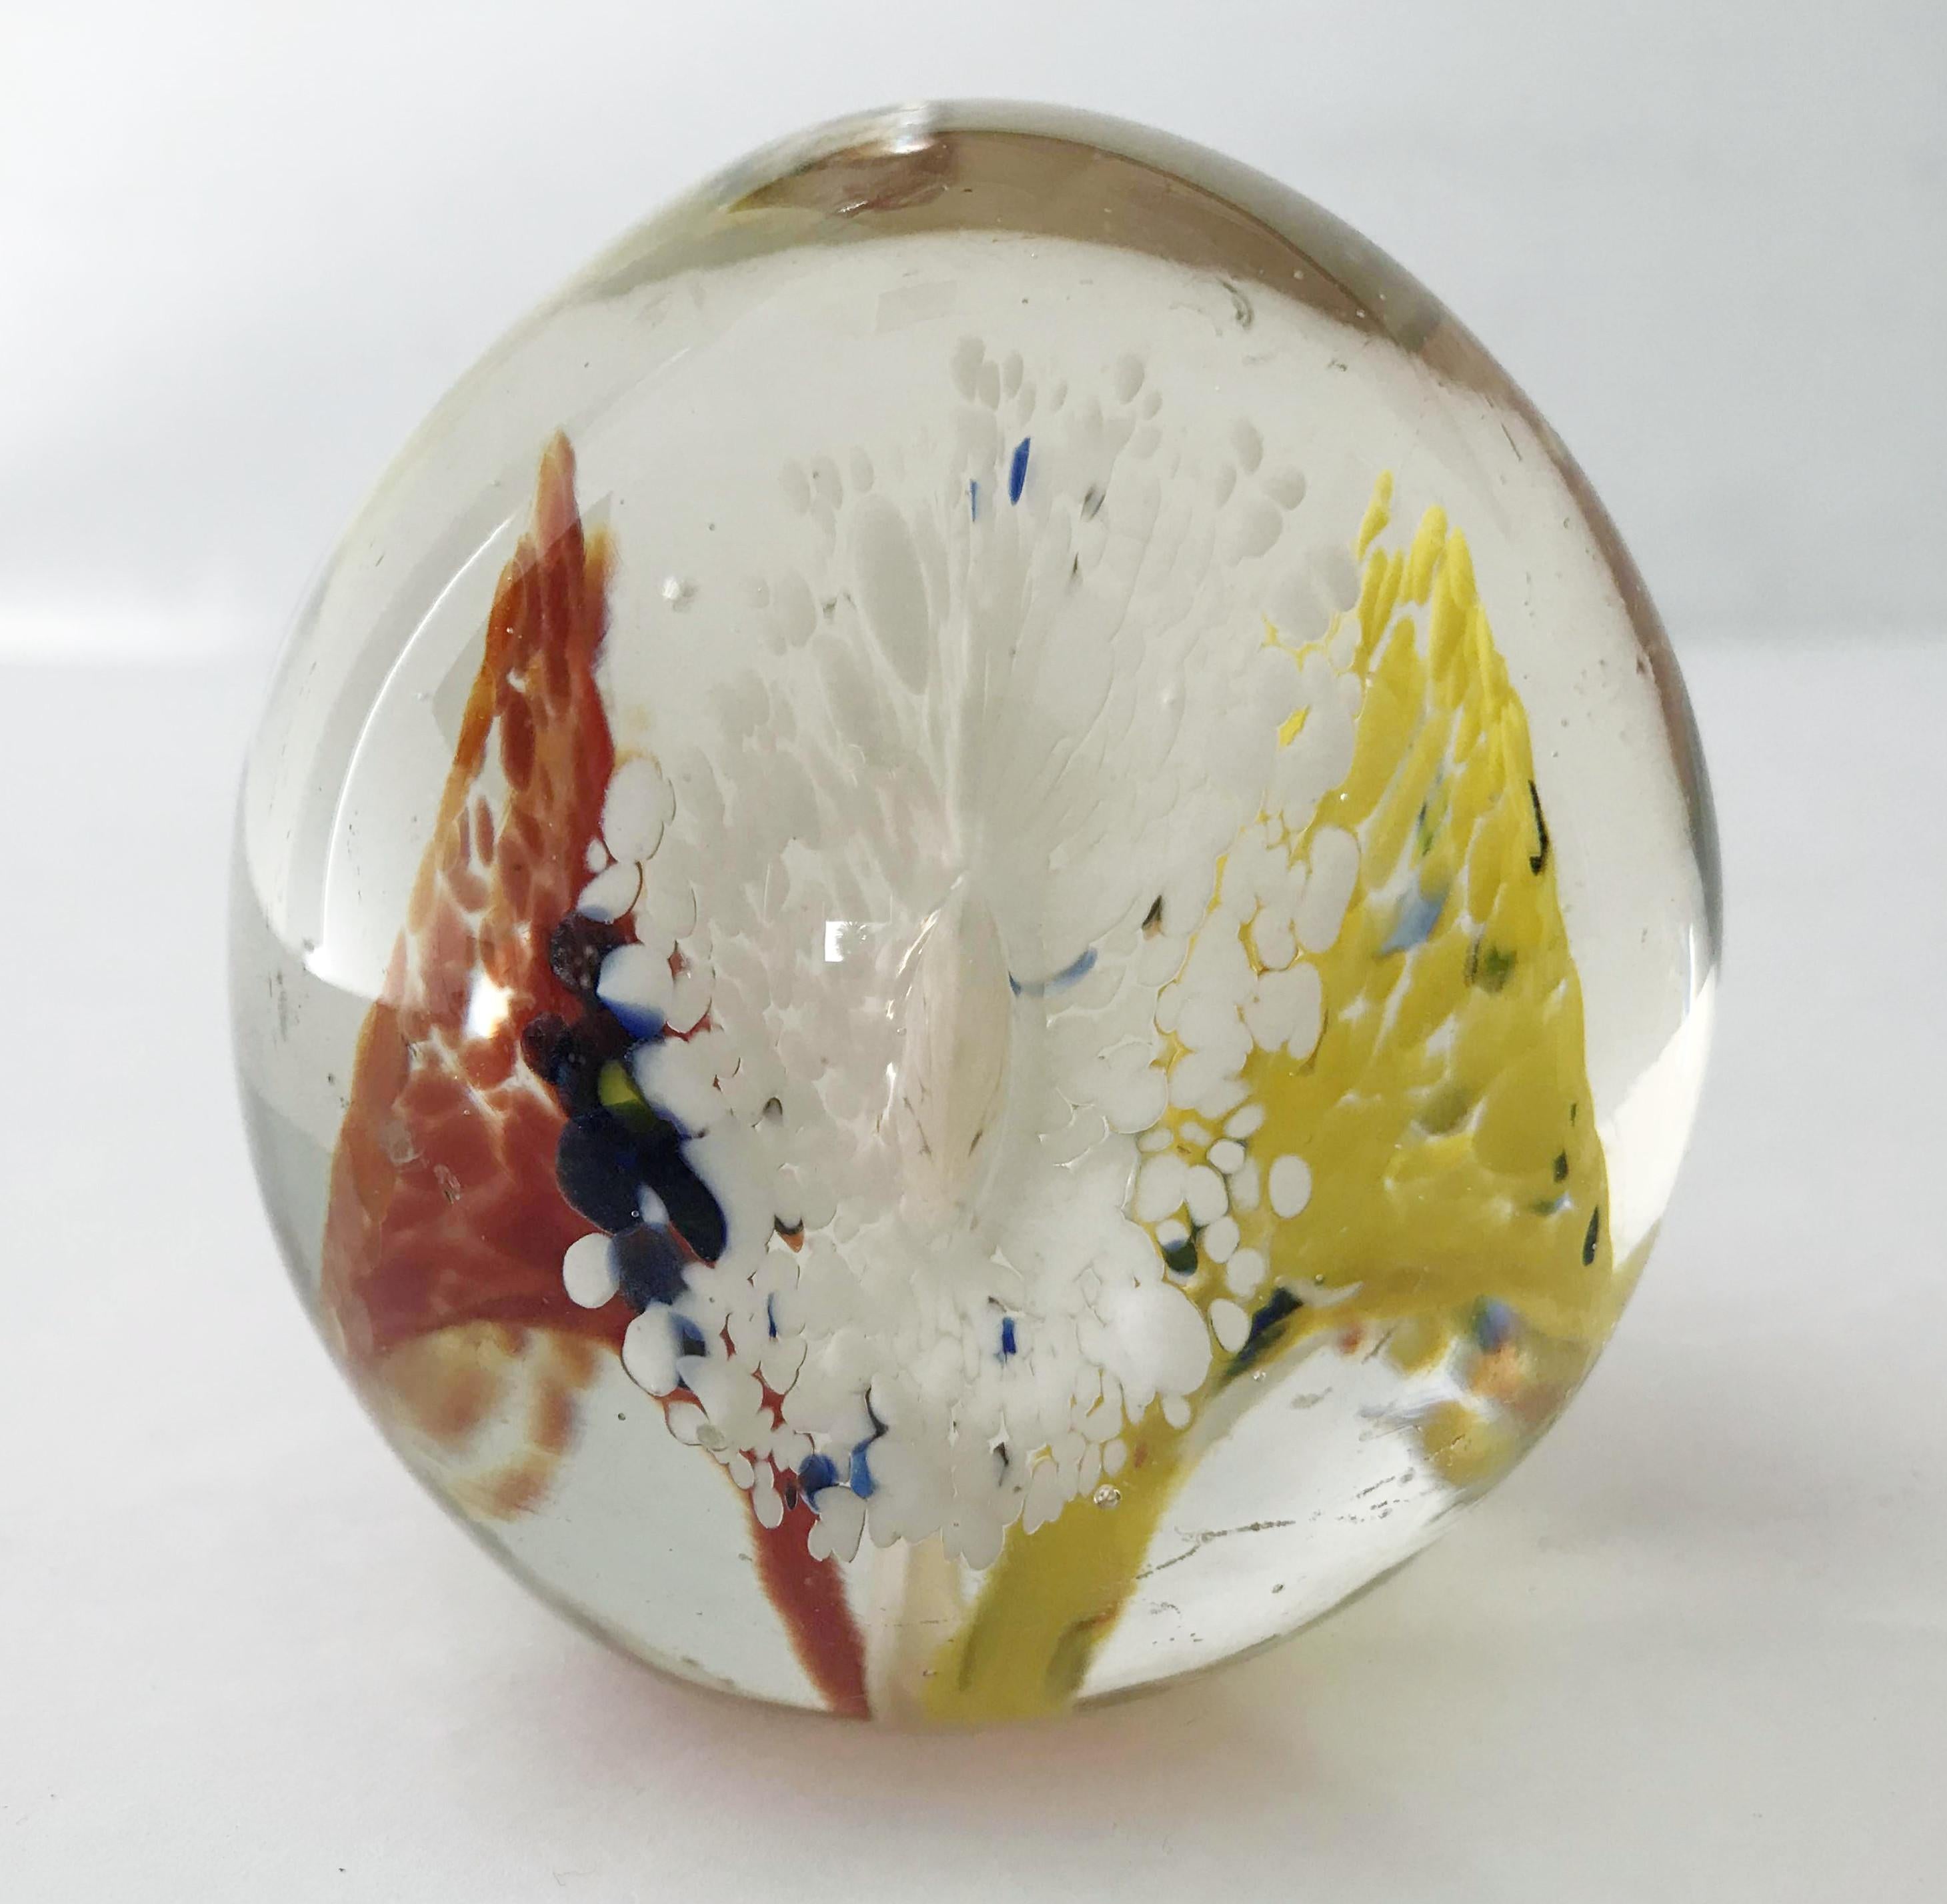 Vintage Italian Murano glass paperweight hand blown with three flowers inside, made in Italy, circa 1960s
Measures: diameter 2.5 inches, height 2.5 inches
1 in stock in Palm Springs ON 50% OFF SALE for $199 !
Order reference #: FABIOLTD G154
This